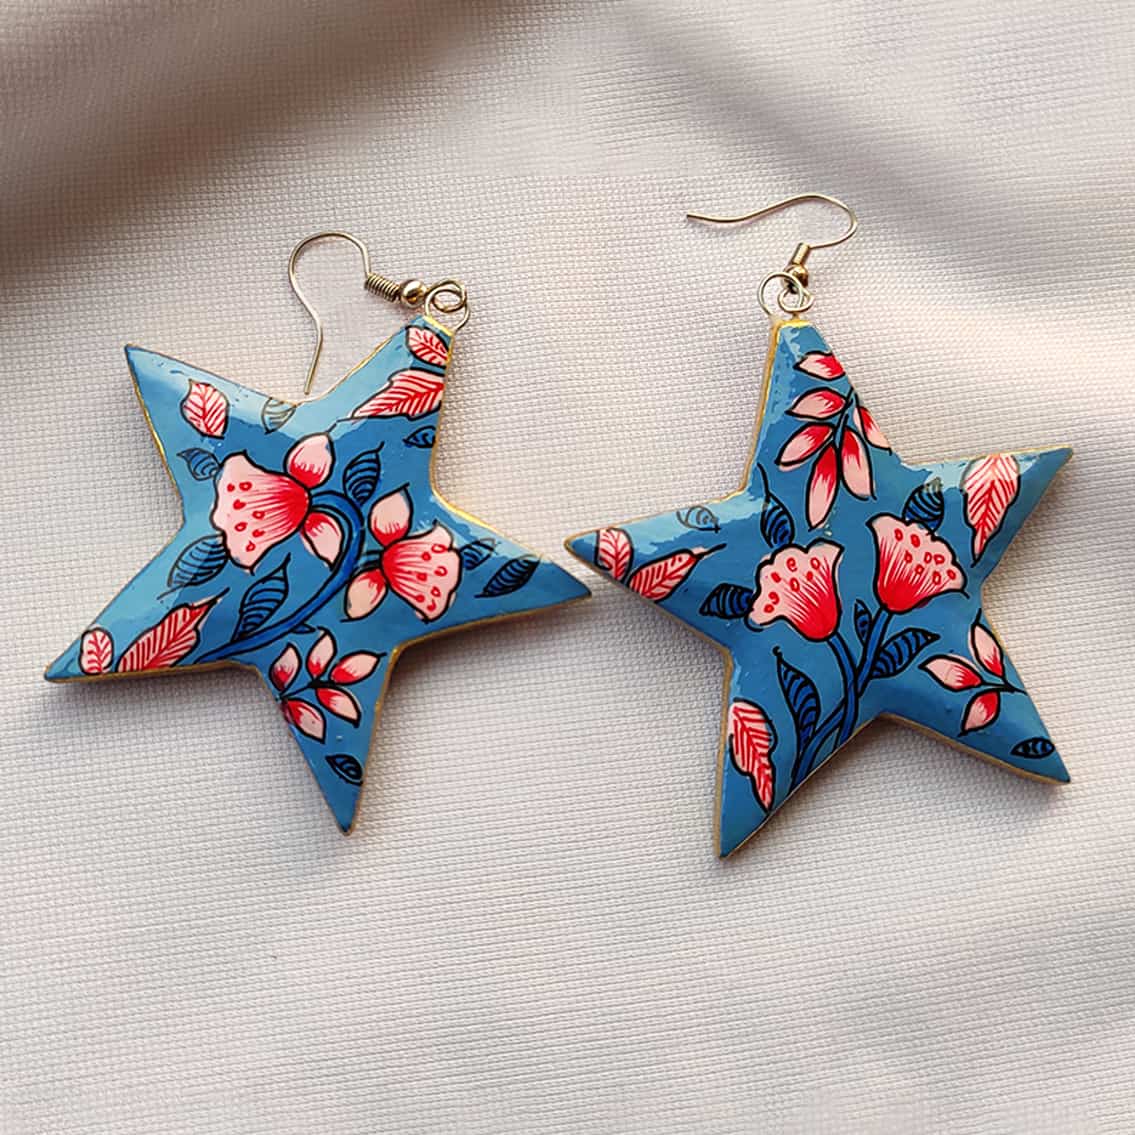 Blue Star Hand Painted Paper Mache Earrings